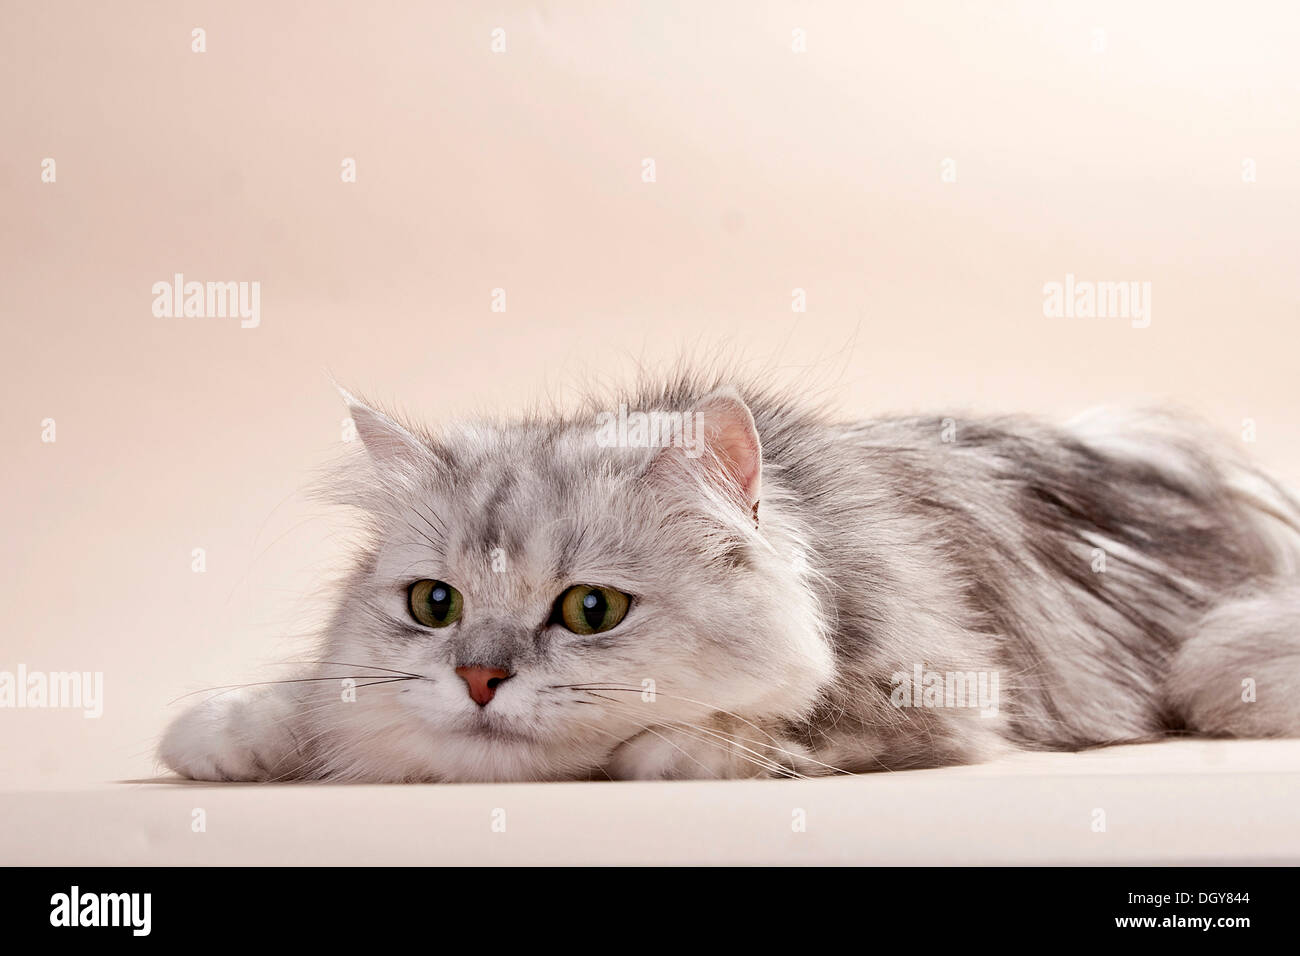 Silver-shaded British longhair cat lying on the floor Stock Photo